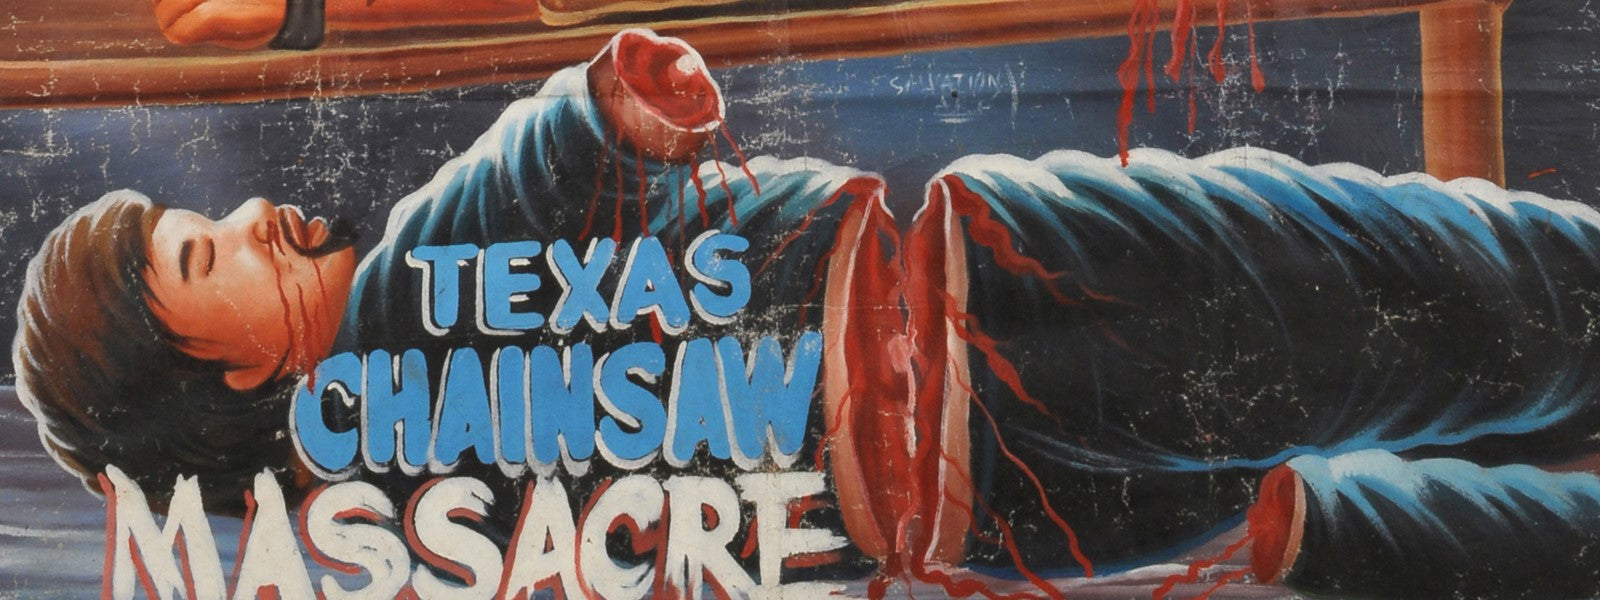 THE TEXAS CHAINSAW MASSACRE MOVIE POSTER HAND PAINTED IN GHANA FOR THE LOCAL CINEMA CLOSE UP